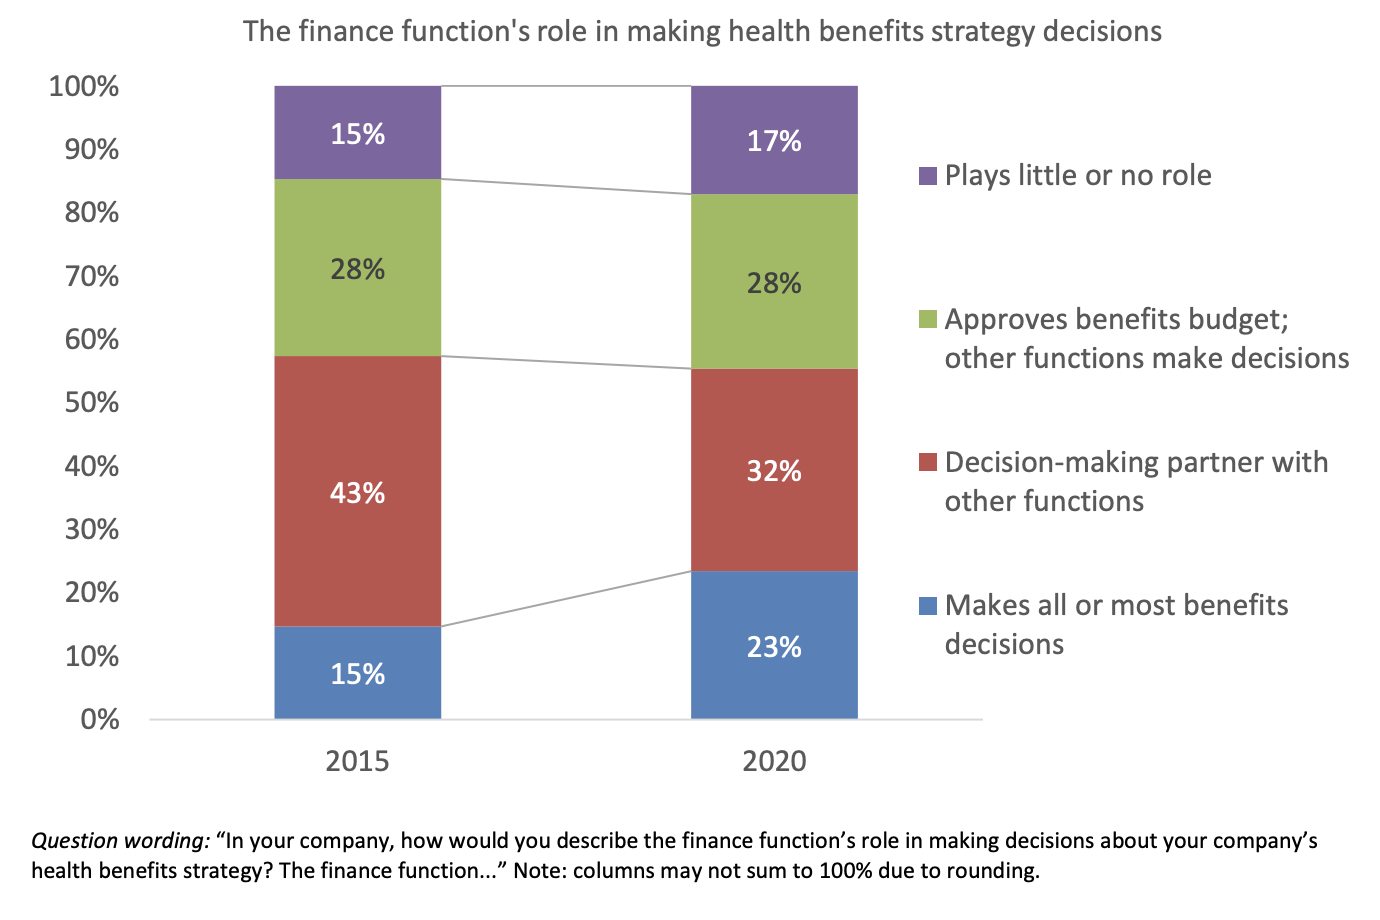 Financial function’s roll on company health benefits strategy decisions 